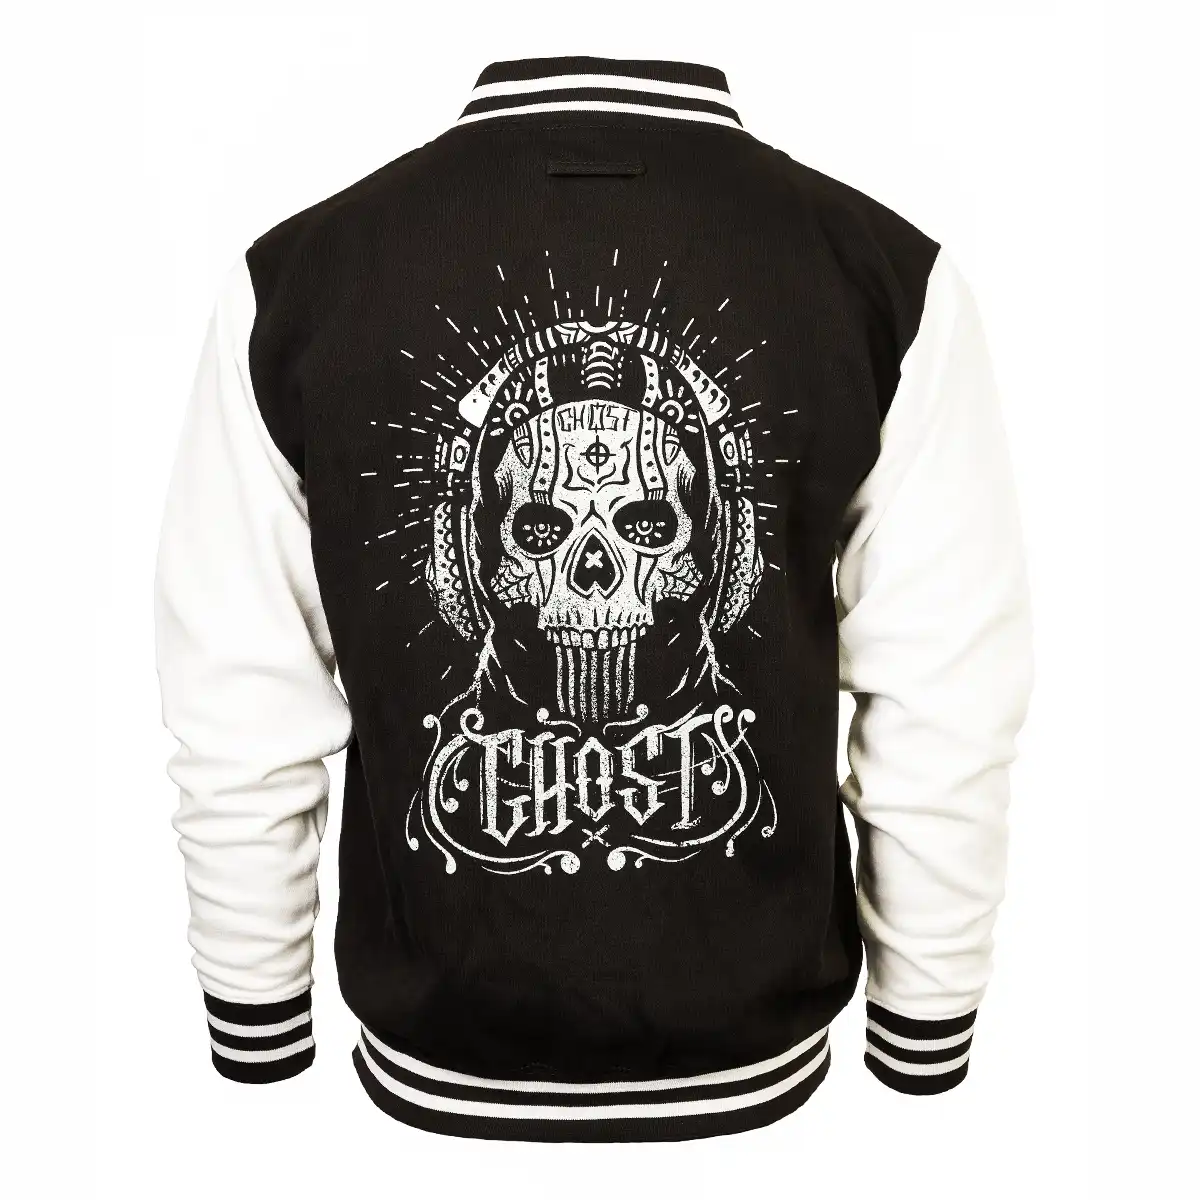 Call of Duty College Jacket "Ghost" Black/White L Image 2